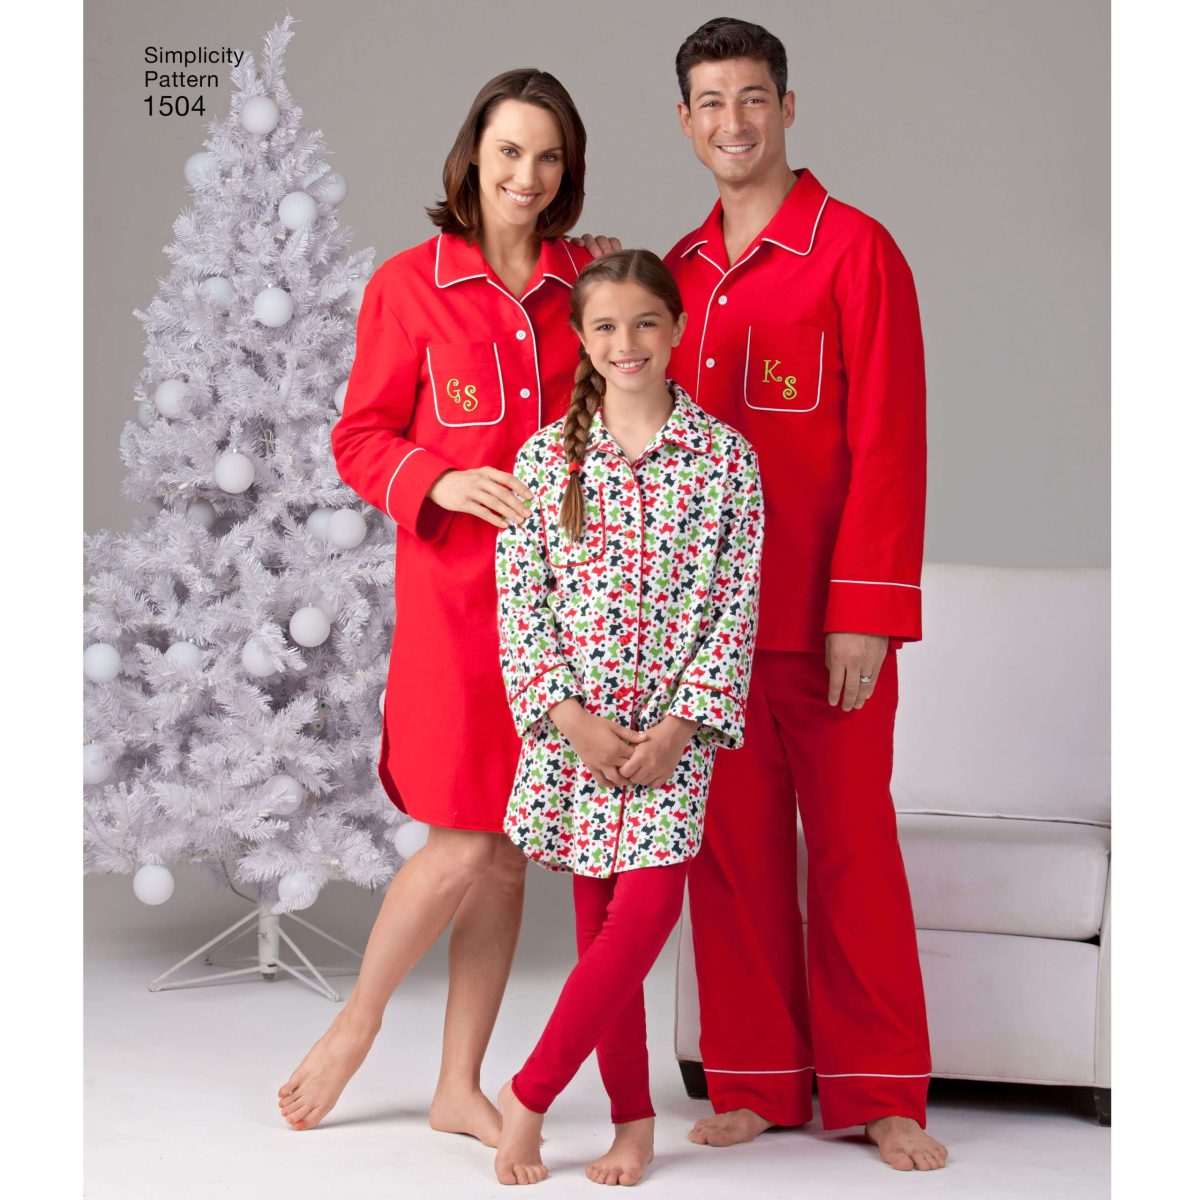 Simplicity Sewing Pattern 1504 Child's, Teens' and Adults' Loungewear